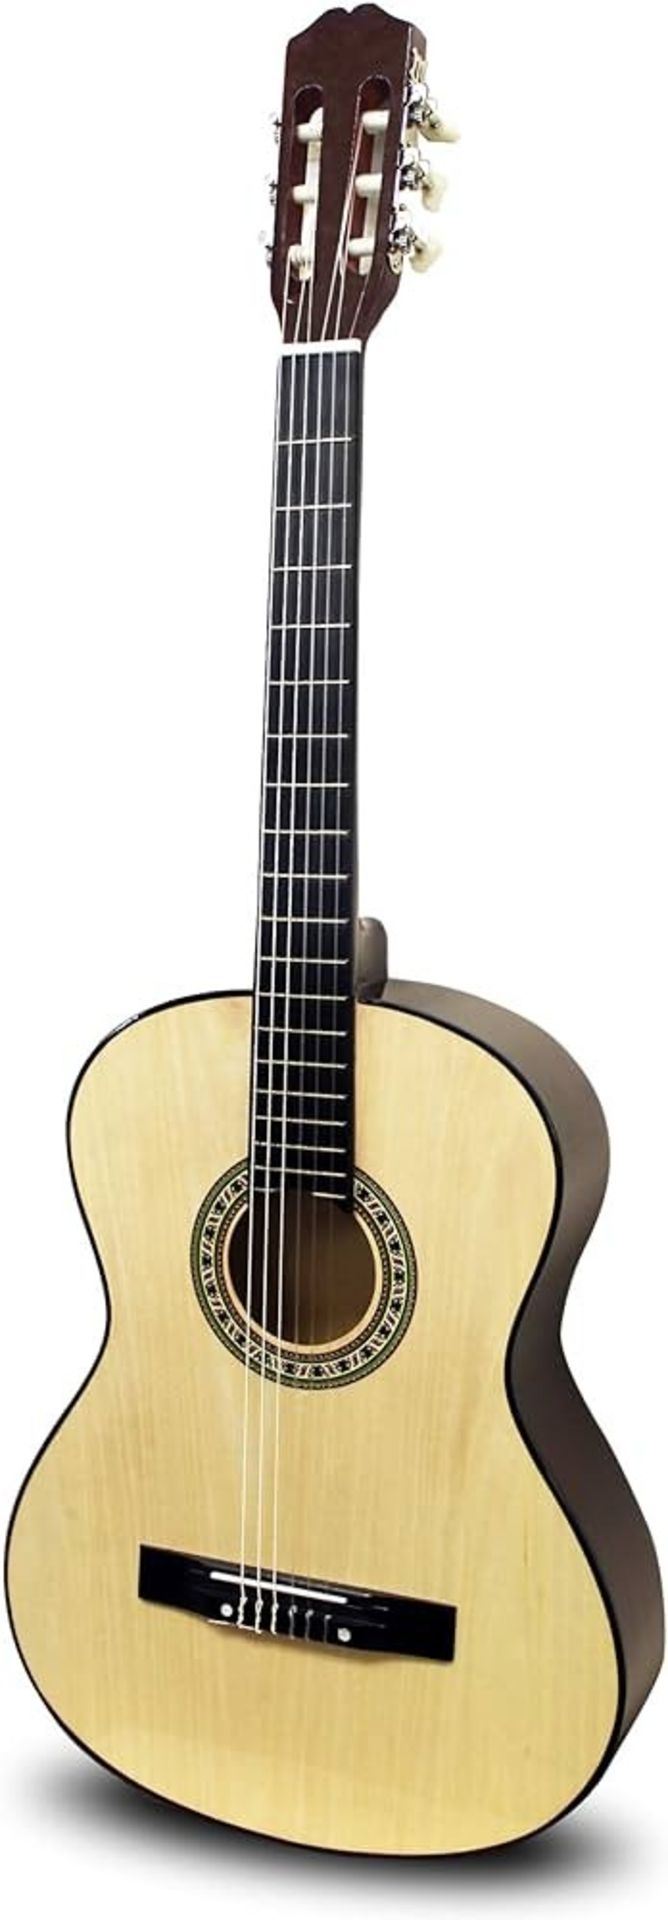 Martin Smith W-590-N Classical Acoustic Guitar - ER21